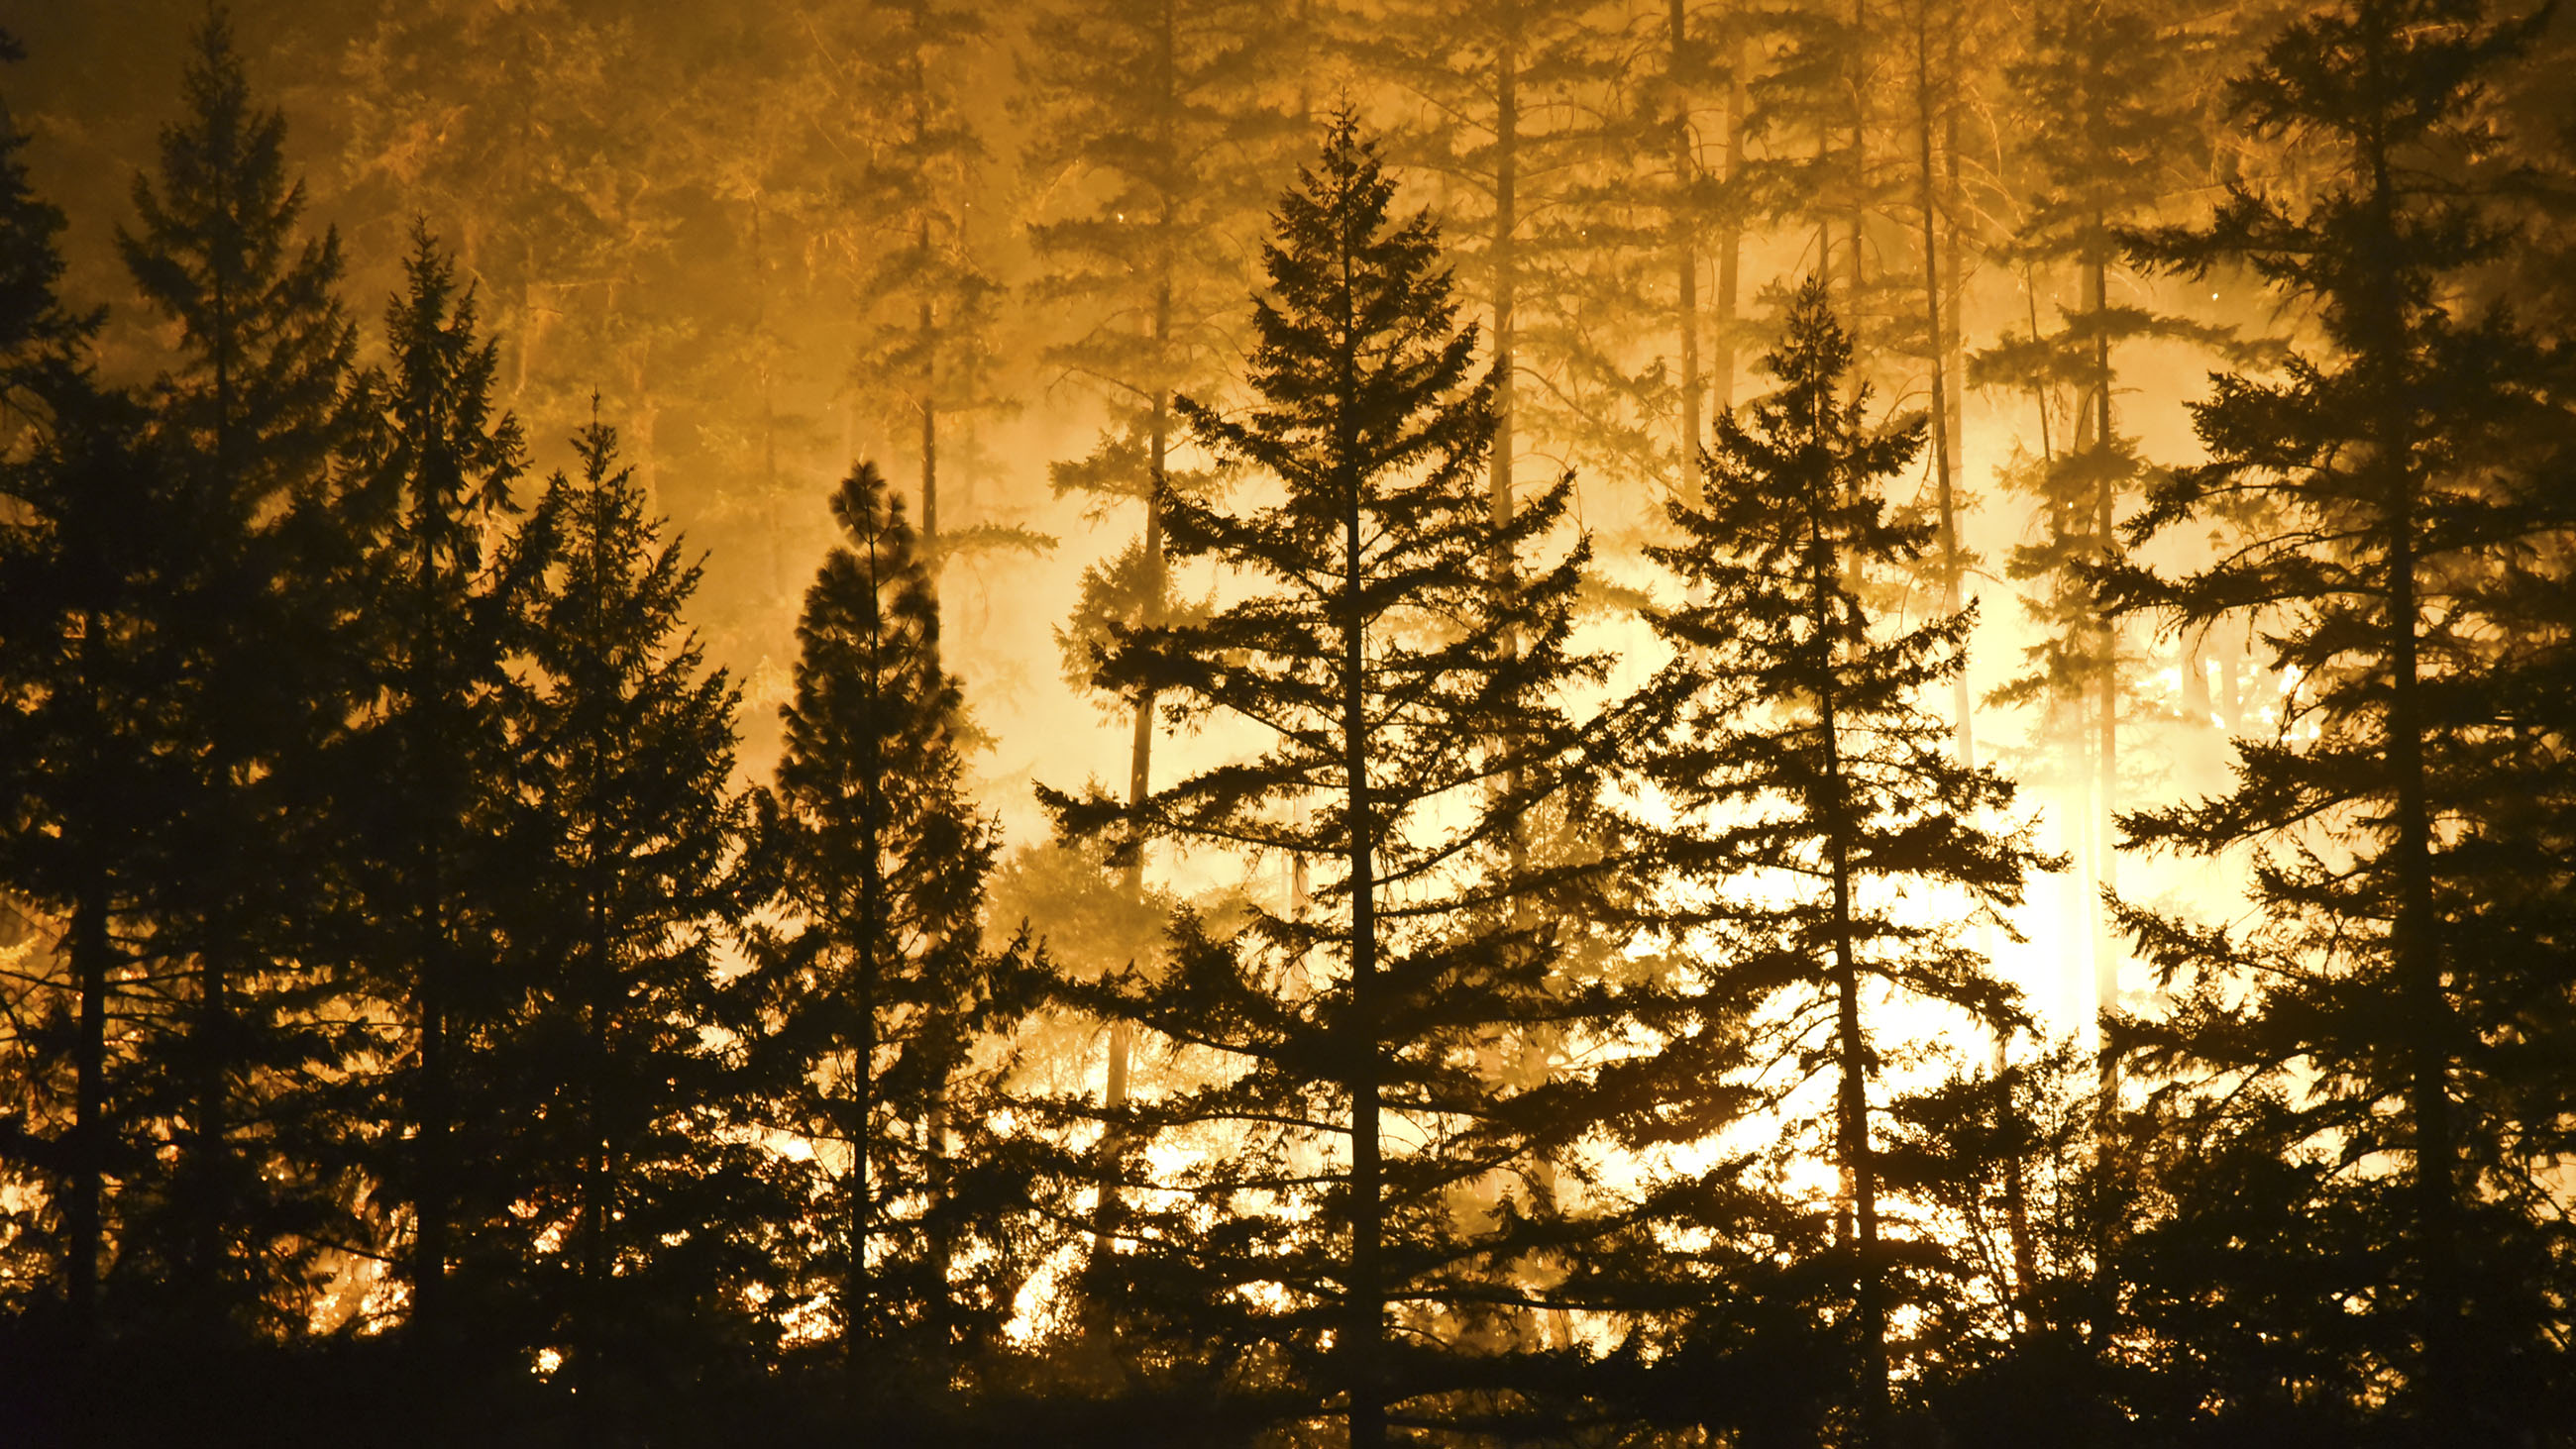 A new study reveals that over the past 30 years, forest fires in the western U.S. have spread 16,000 more square miles than they would have without the effects of climate change.